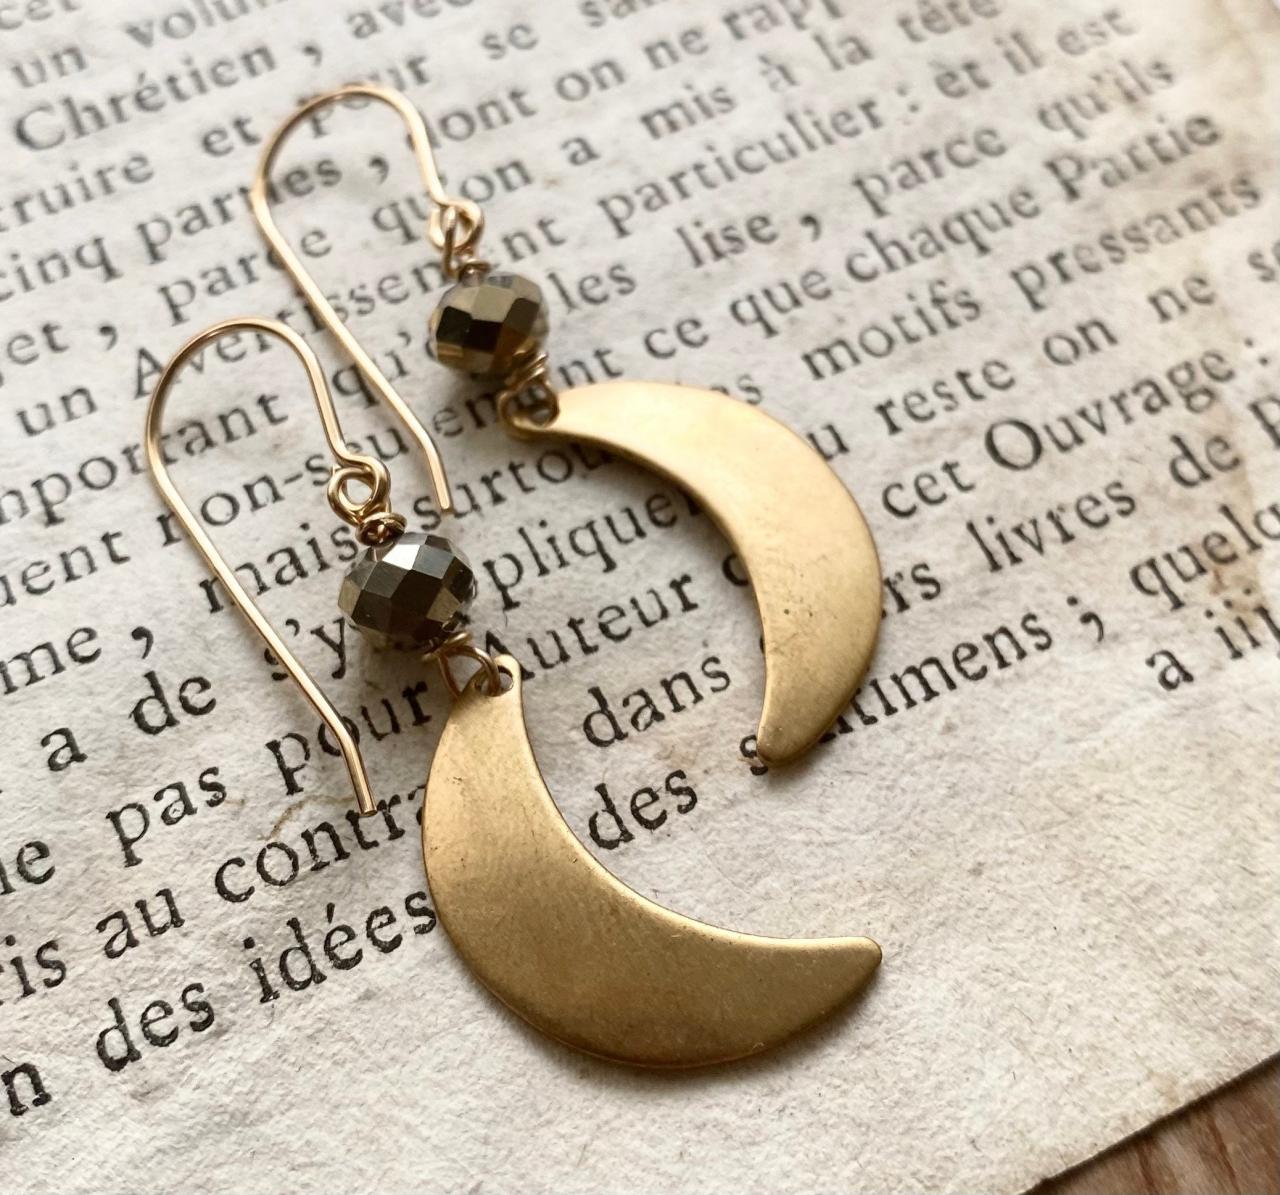 Brass Moon Earrings With Crystal Celestial Charms Charm Jewelry Simple Gifts Under 30 Gold Filled Gifts For Her.